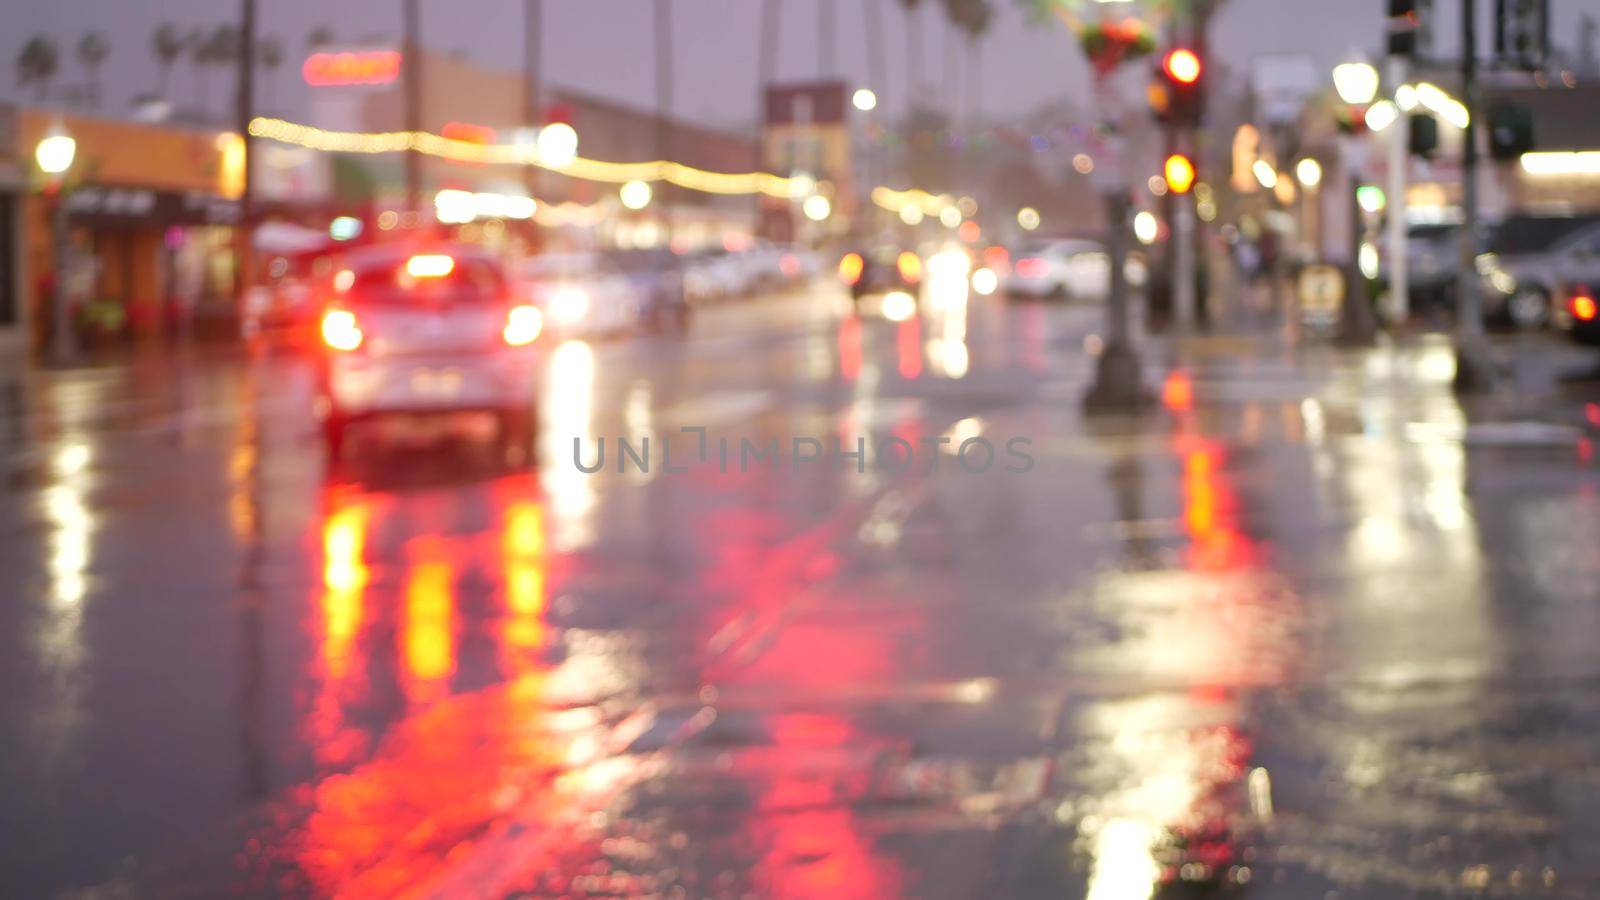 Lights reflection on road in rainy weather. Palm trees and rainfall, California. by DogoraSun